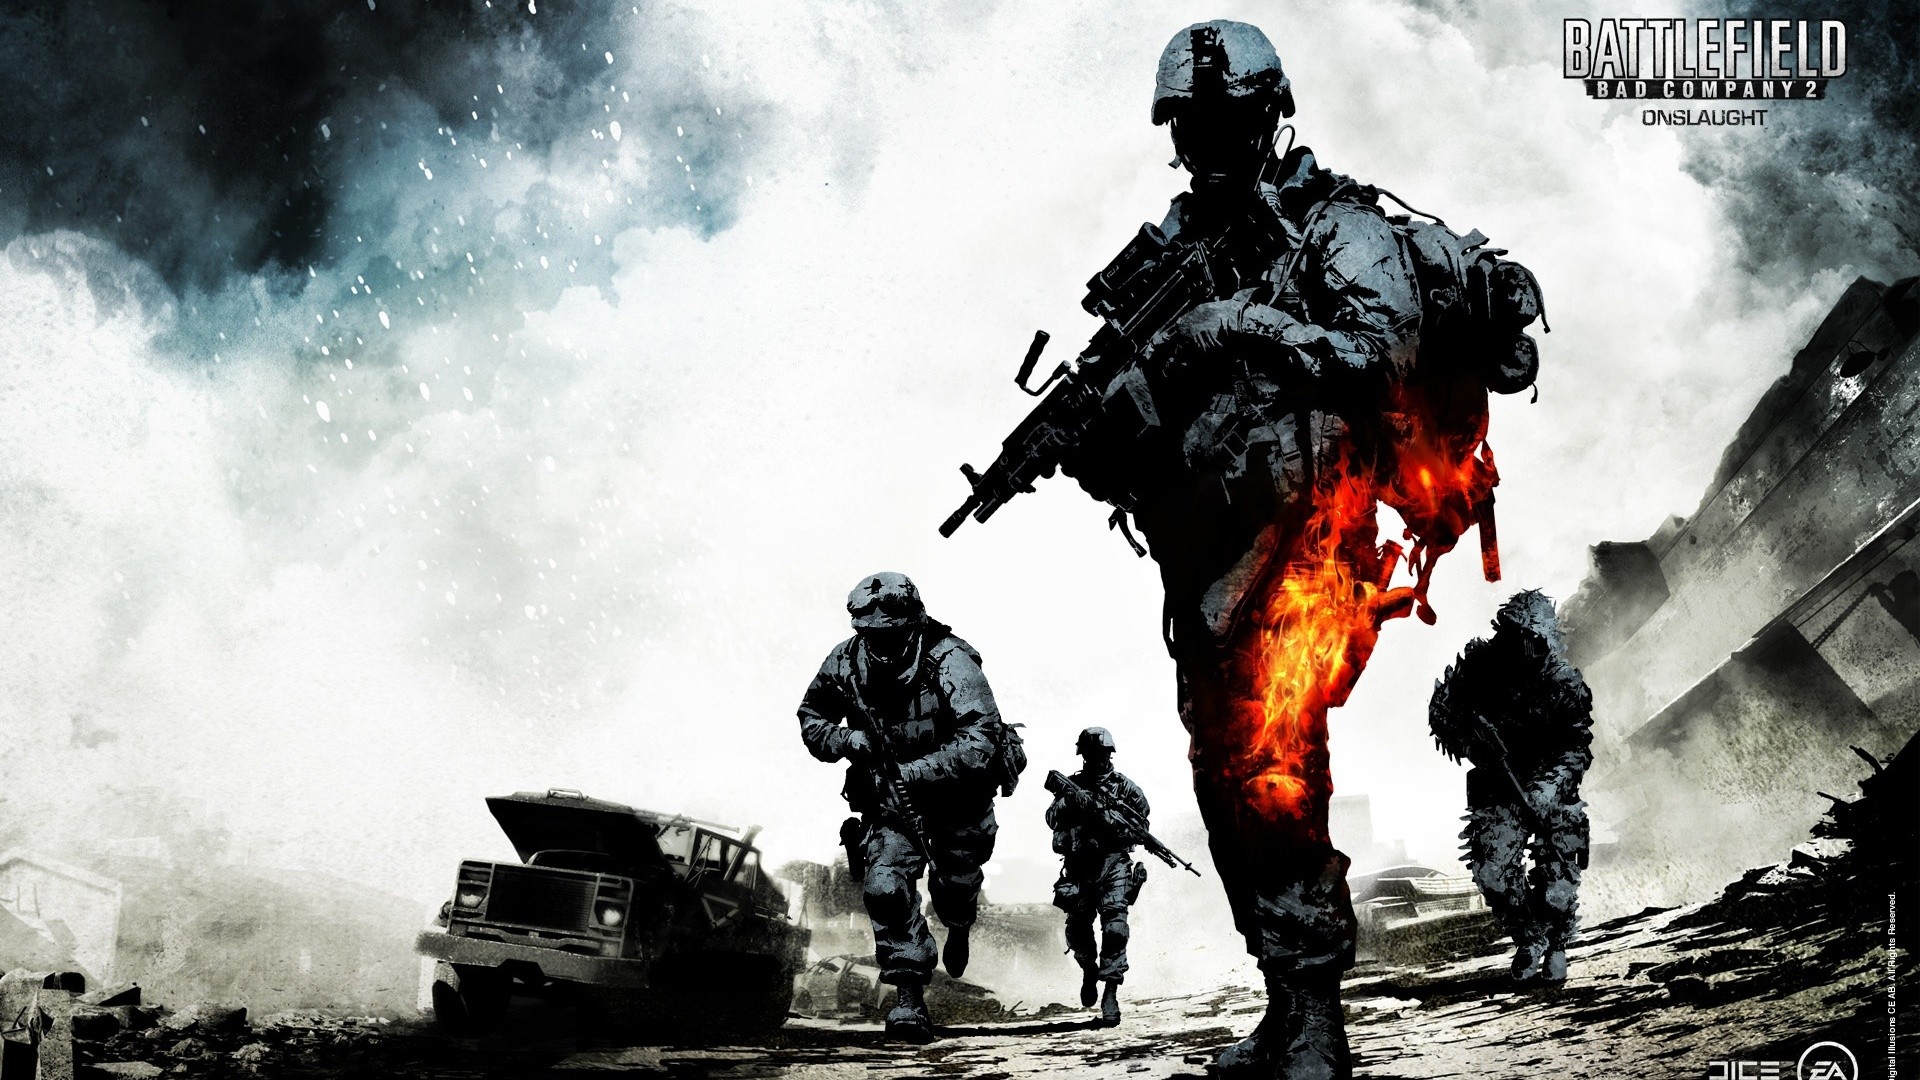 General 1920x1080 video games soldier video game art Battlefield: Bad Company 2 Battlefield: Bad Company 2 Onslaught weapon